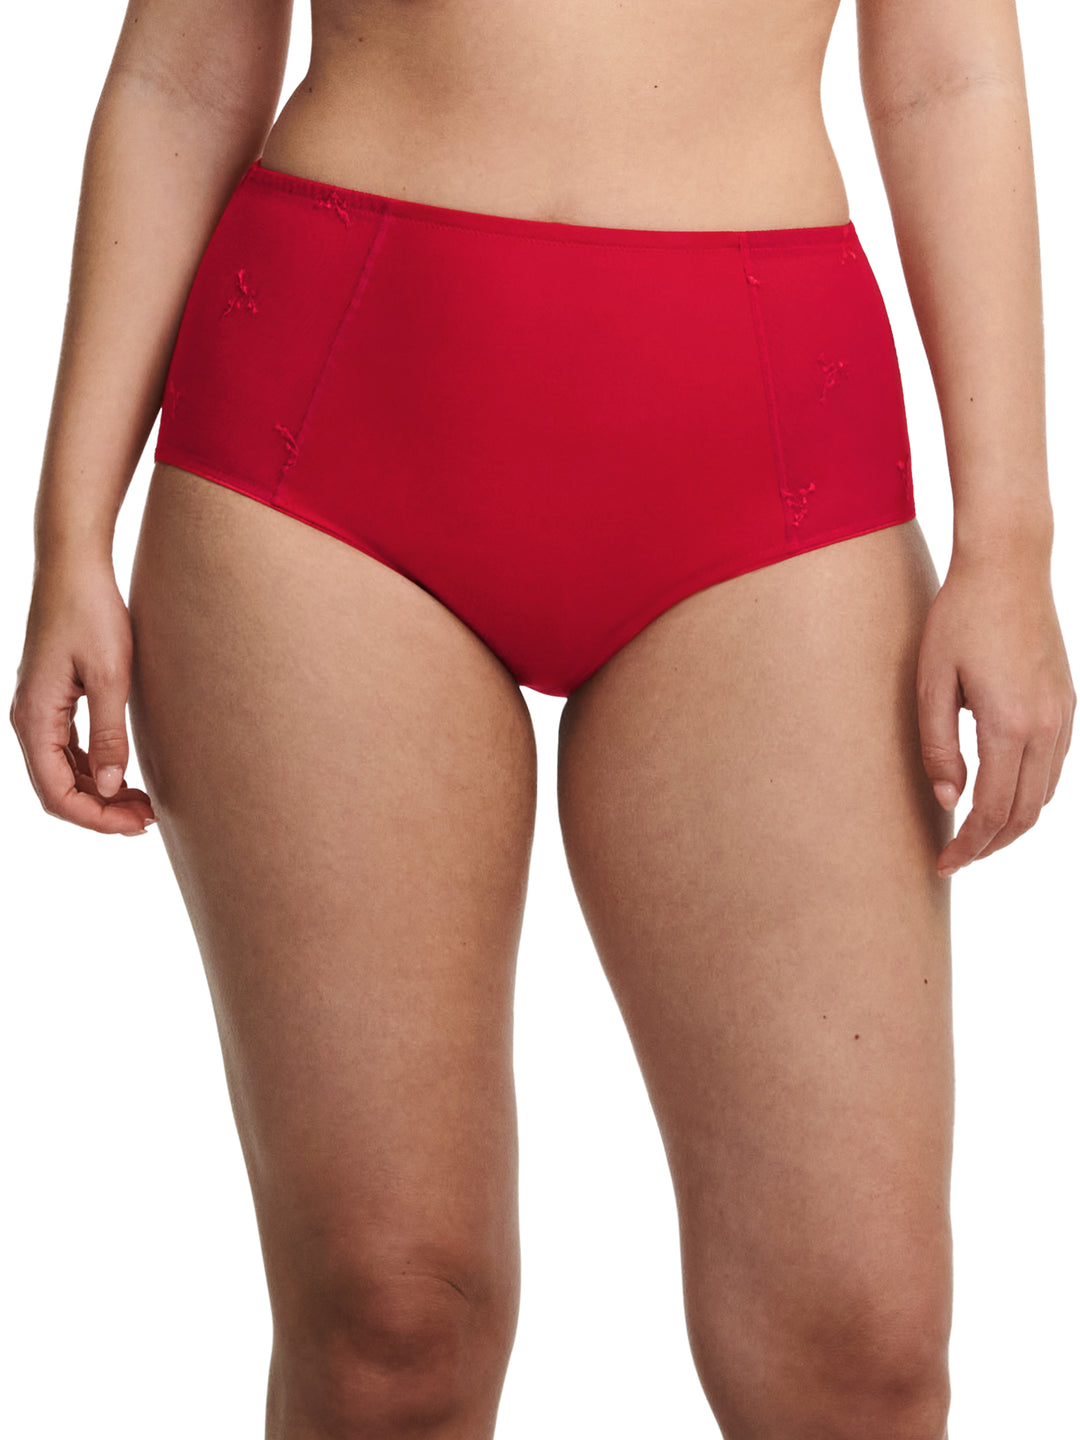 Chantelle - Every Curve High-Waist Support Full Brief Scarlet / Peach